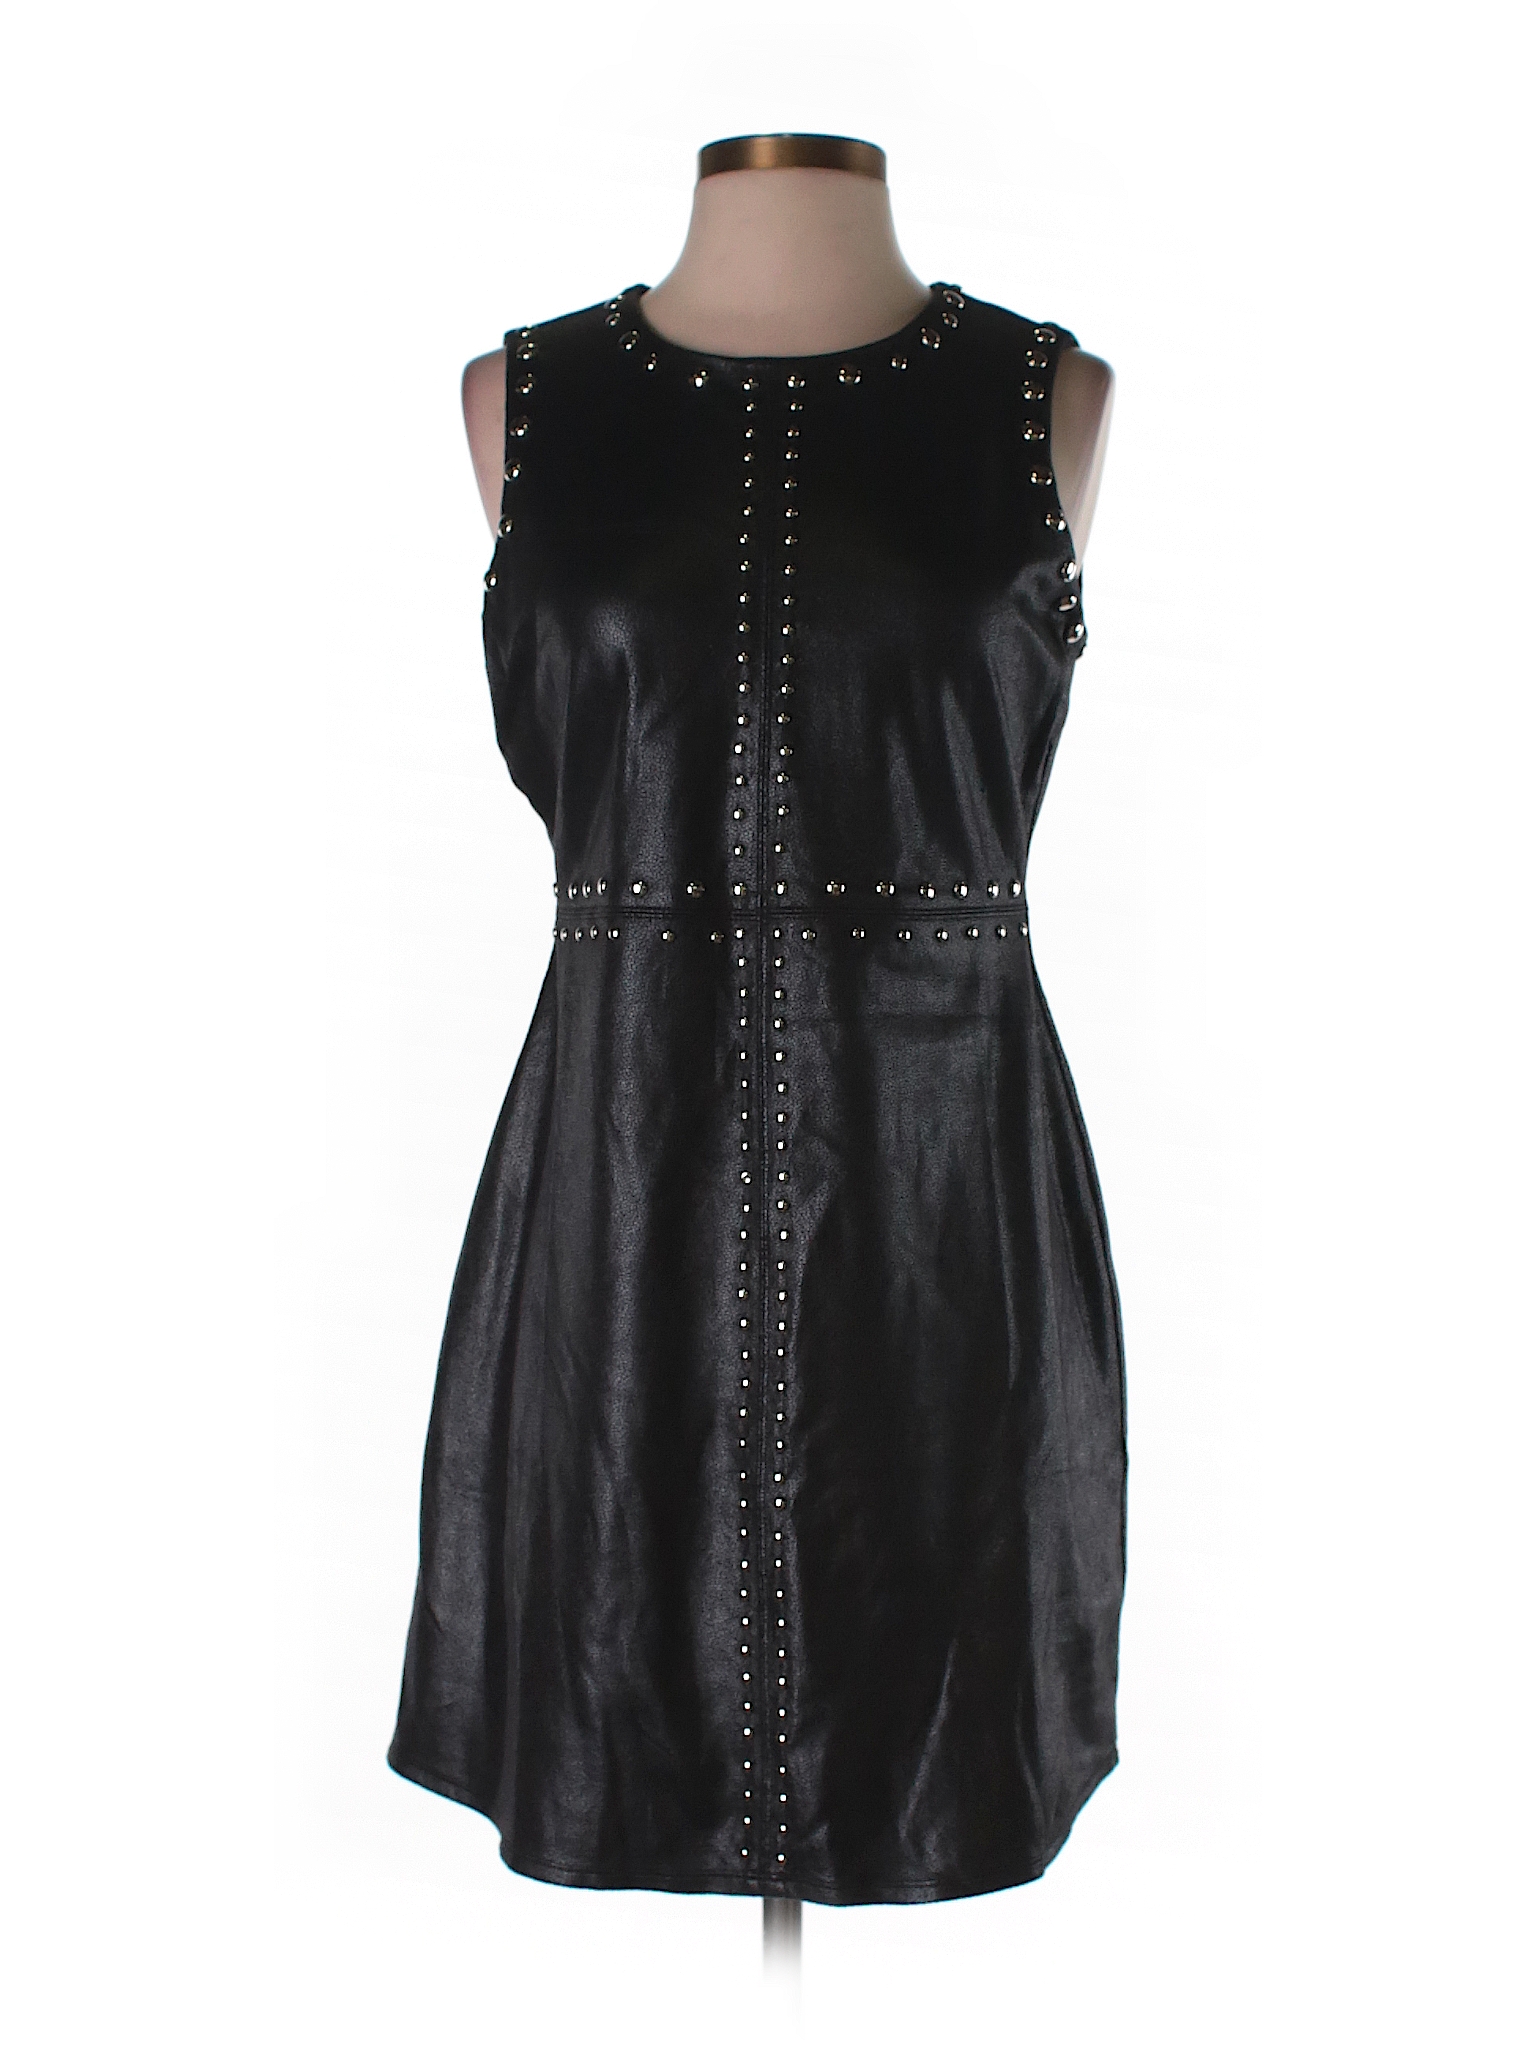 Liberty Garden Solid Black Faux Leather Dress Size S - 79% off | thredUP